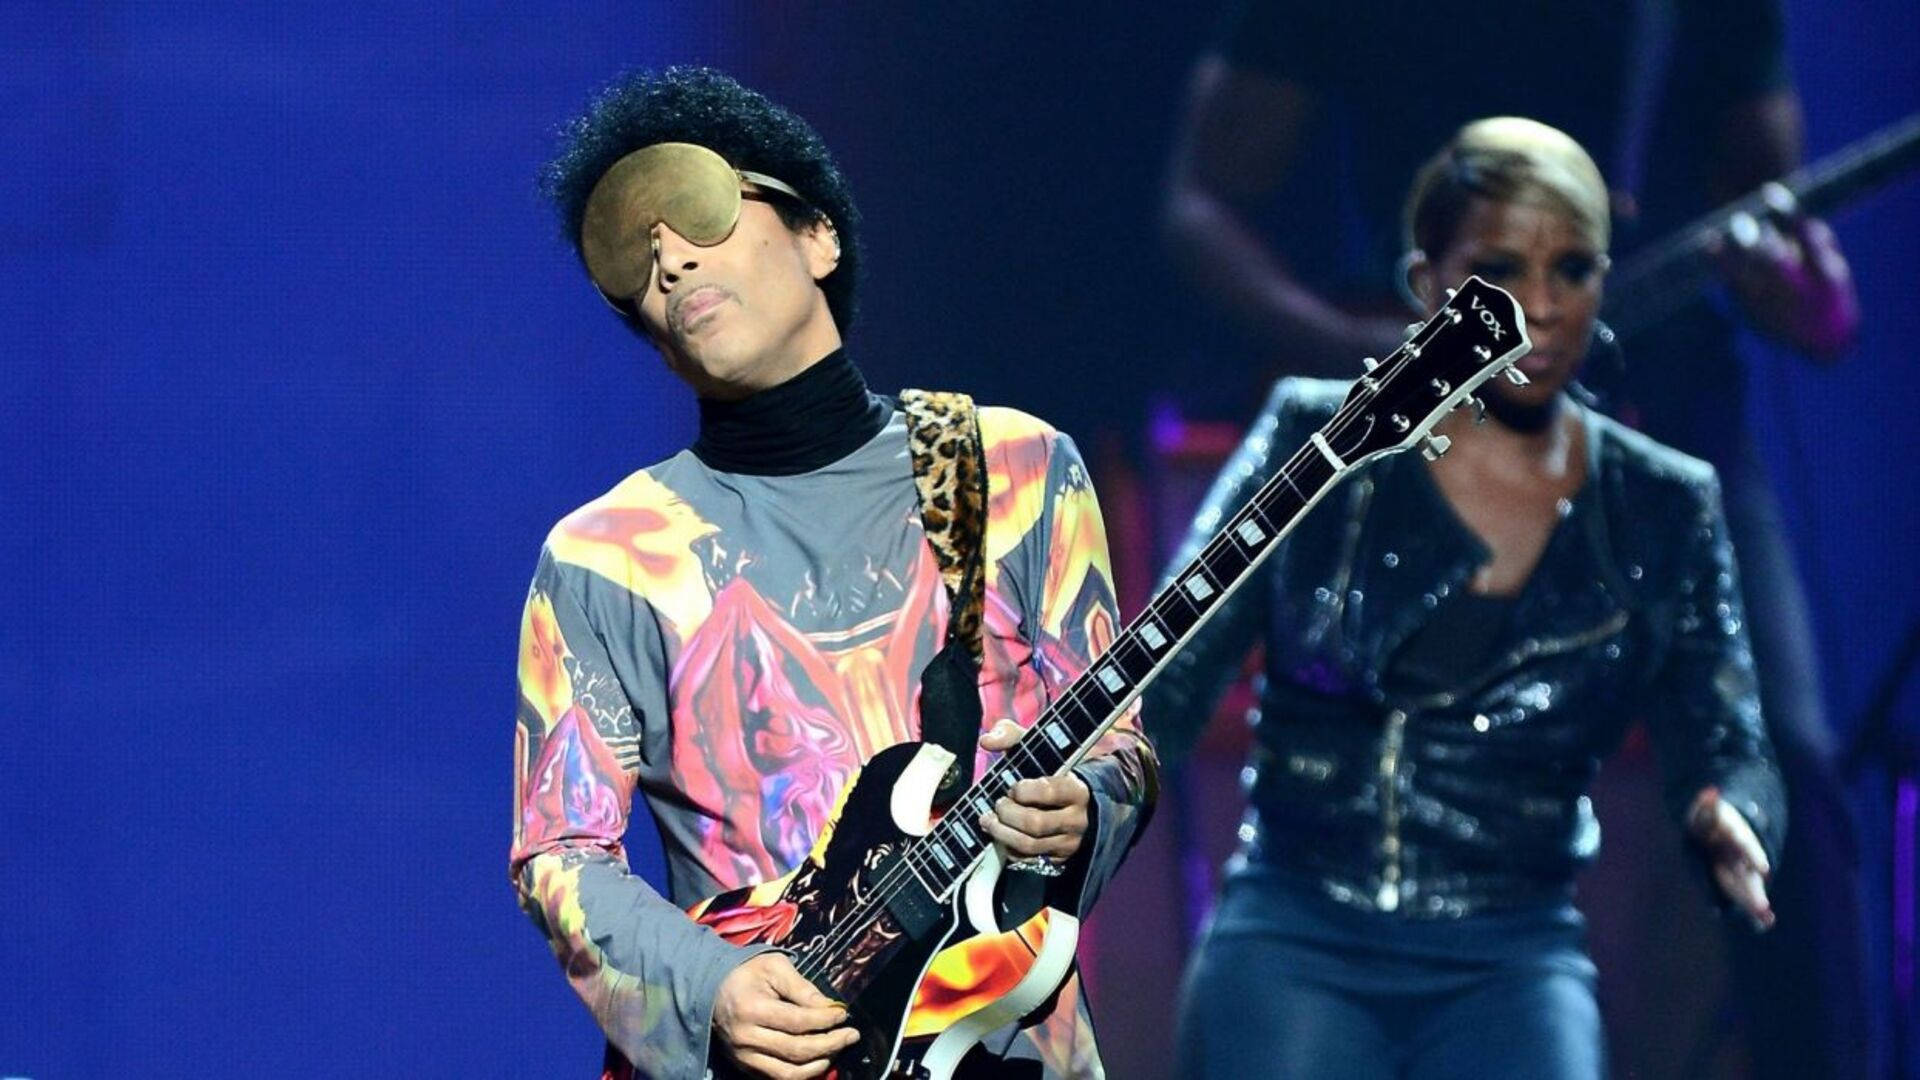 Caption: Prince Performing On Stage